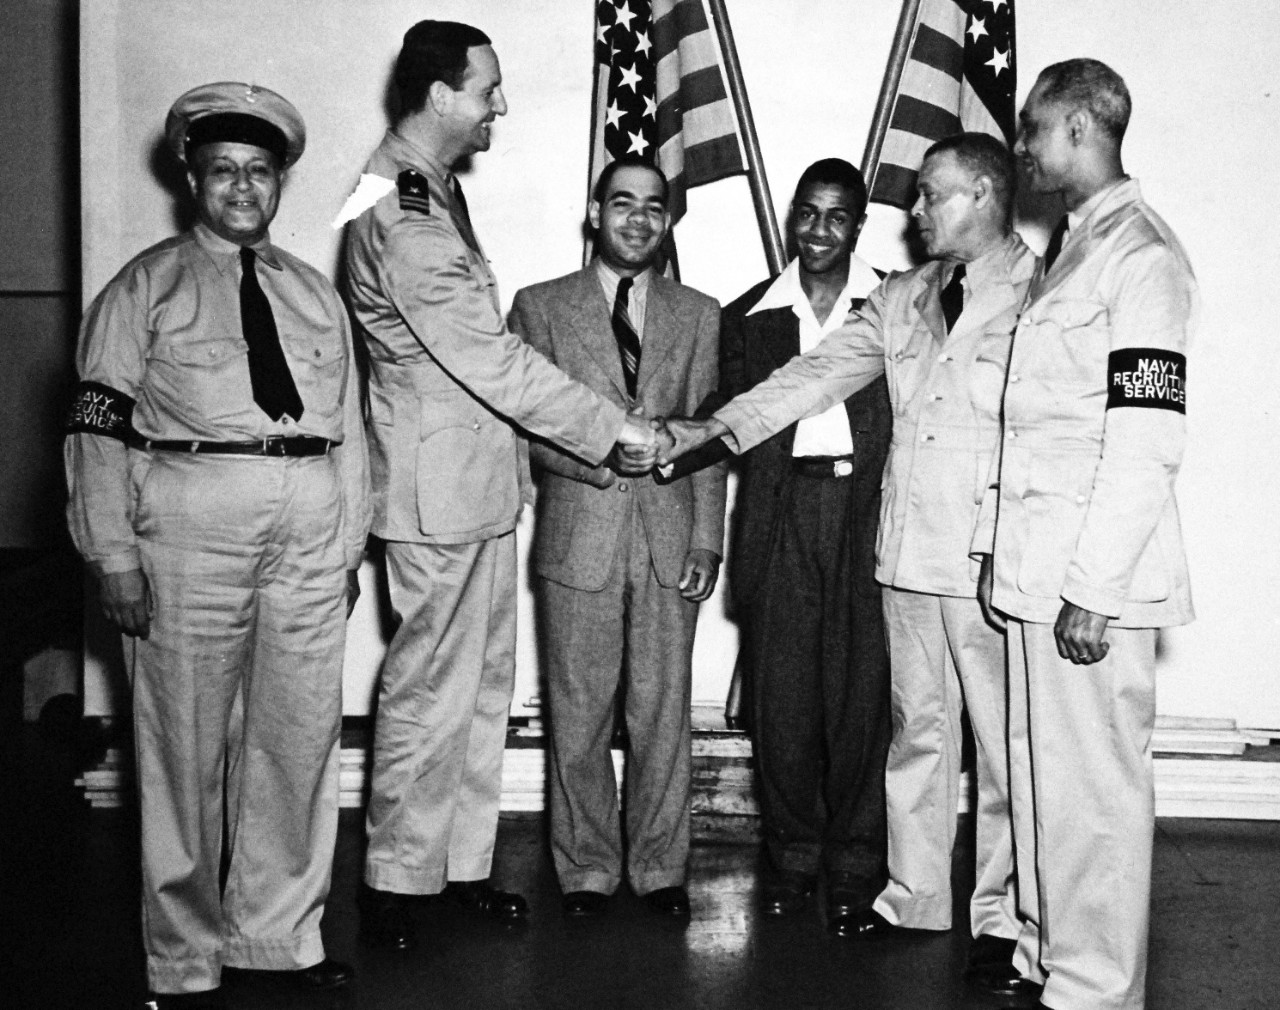 80-CF-882-3_Box 175:   African Americans sworn in for duty, June 1942.   Shown, left to right:  Chief Gunner William H. Brady, Lieutenant Kenneth B. Emmons, Henry Fortune, James T. Howard, Jr., Chief Walter Tender Joseph Brinkley and Chief Recruiting Specialist Earl Ross, at Philadelphia, Pennsylvania, June 1942.  Official U.S. Navy photograph, now in the collections of the National Archives.